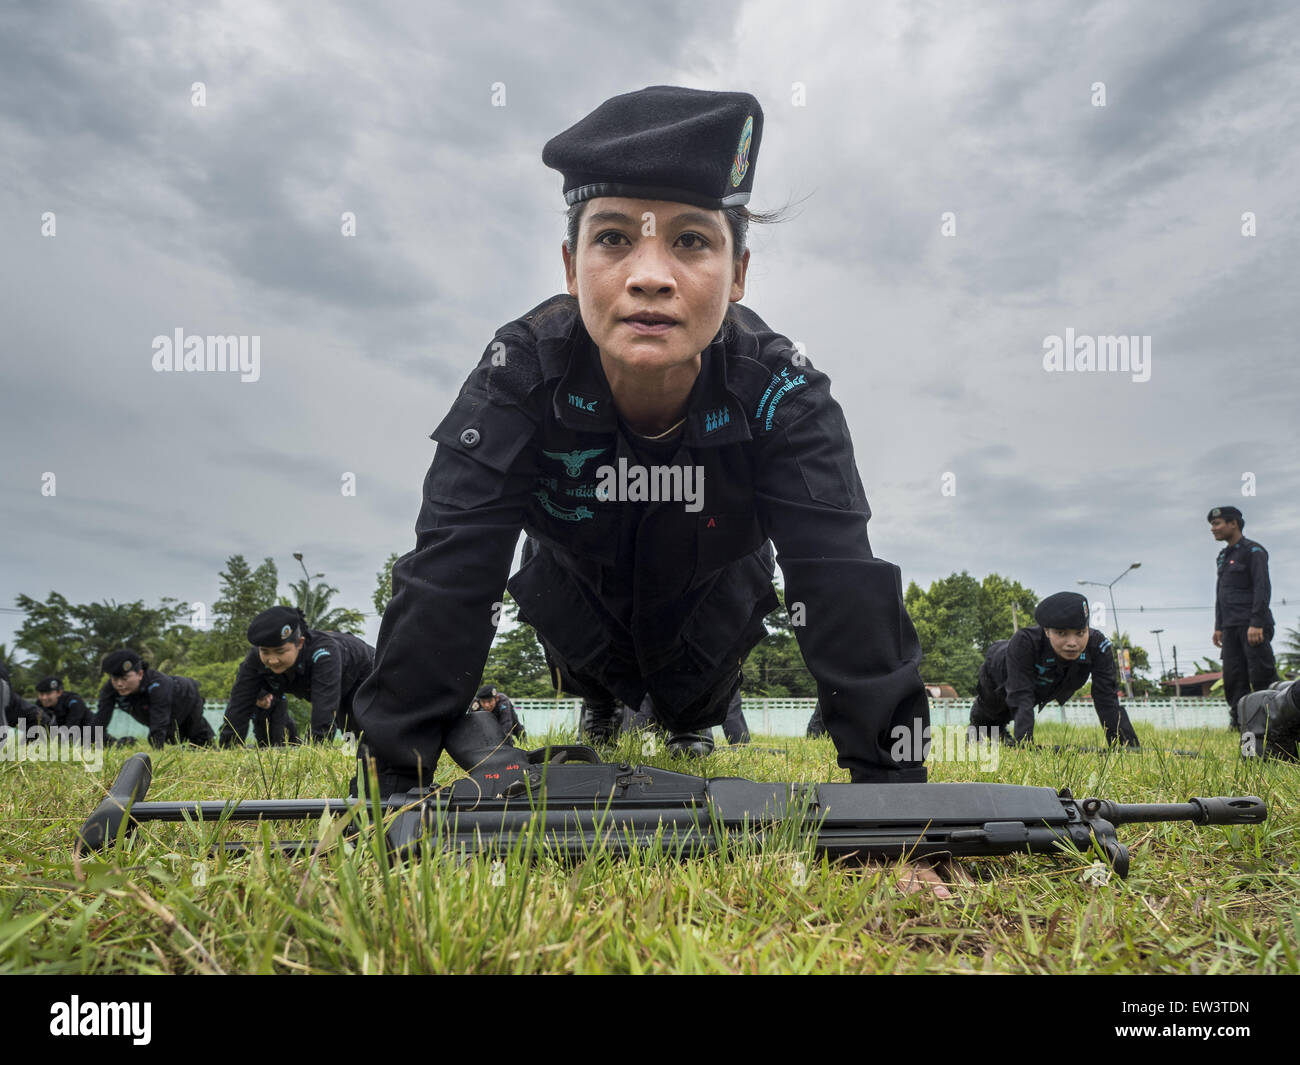 June 17, 2015 - Rangae, Narathiwat, Thailand - A Thai woman Ranger does pushup during drills at the Ranger camp in Rangae, Narathiwat province. There are 5 platoons of women Rangers serving in Thailand's restive Deep South. They generally perform security missions at large public events and do public outreach missions, like home wellness checks and delivering food and medicine into rural communities. The medics frequently work in civilian clothes because the Rangers found people are more relaxed around them when they're in civilian clothes. About 6,000 people have been killed in sectarian viol Stock Photo